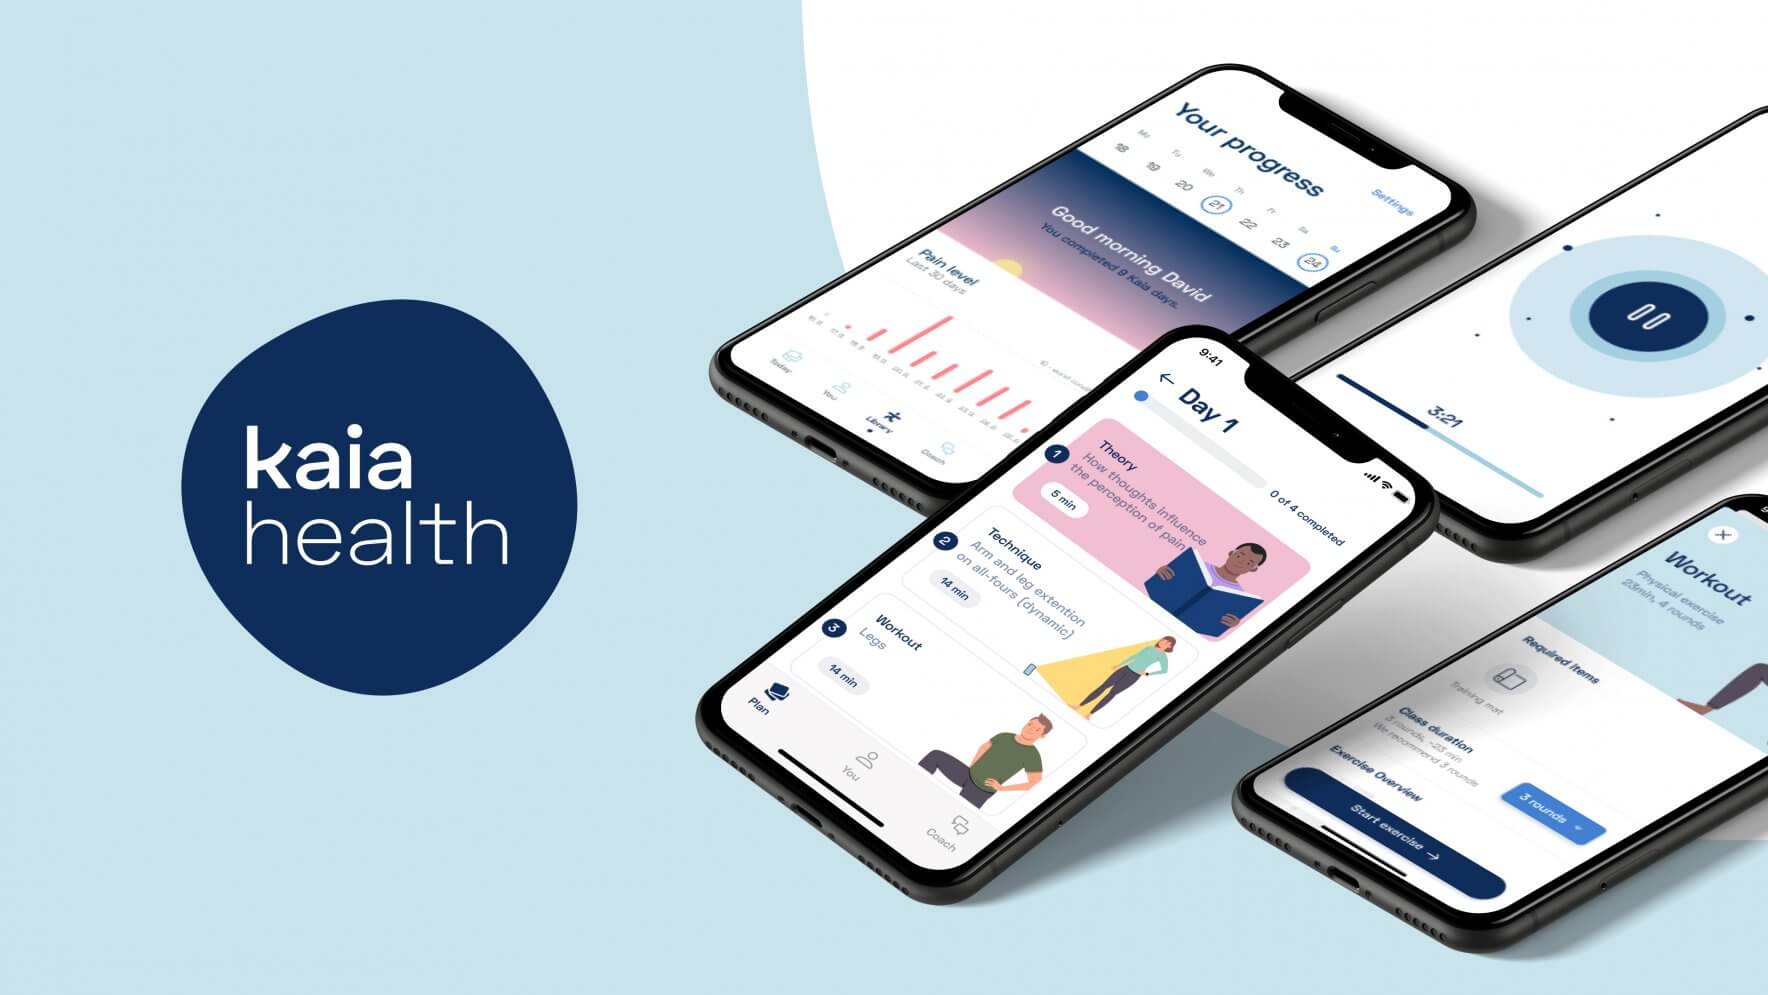 Kaia Health logo in white and blue next to smartphones showing the digital experience.